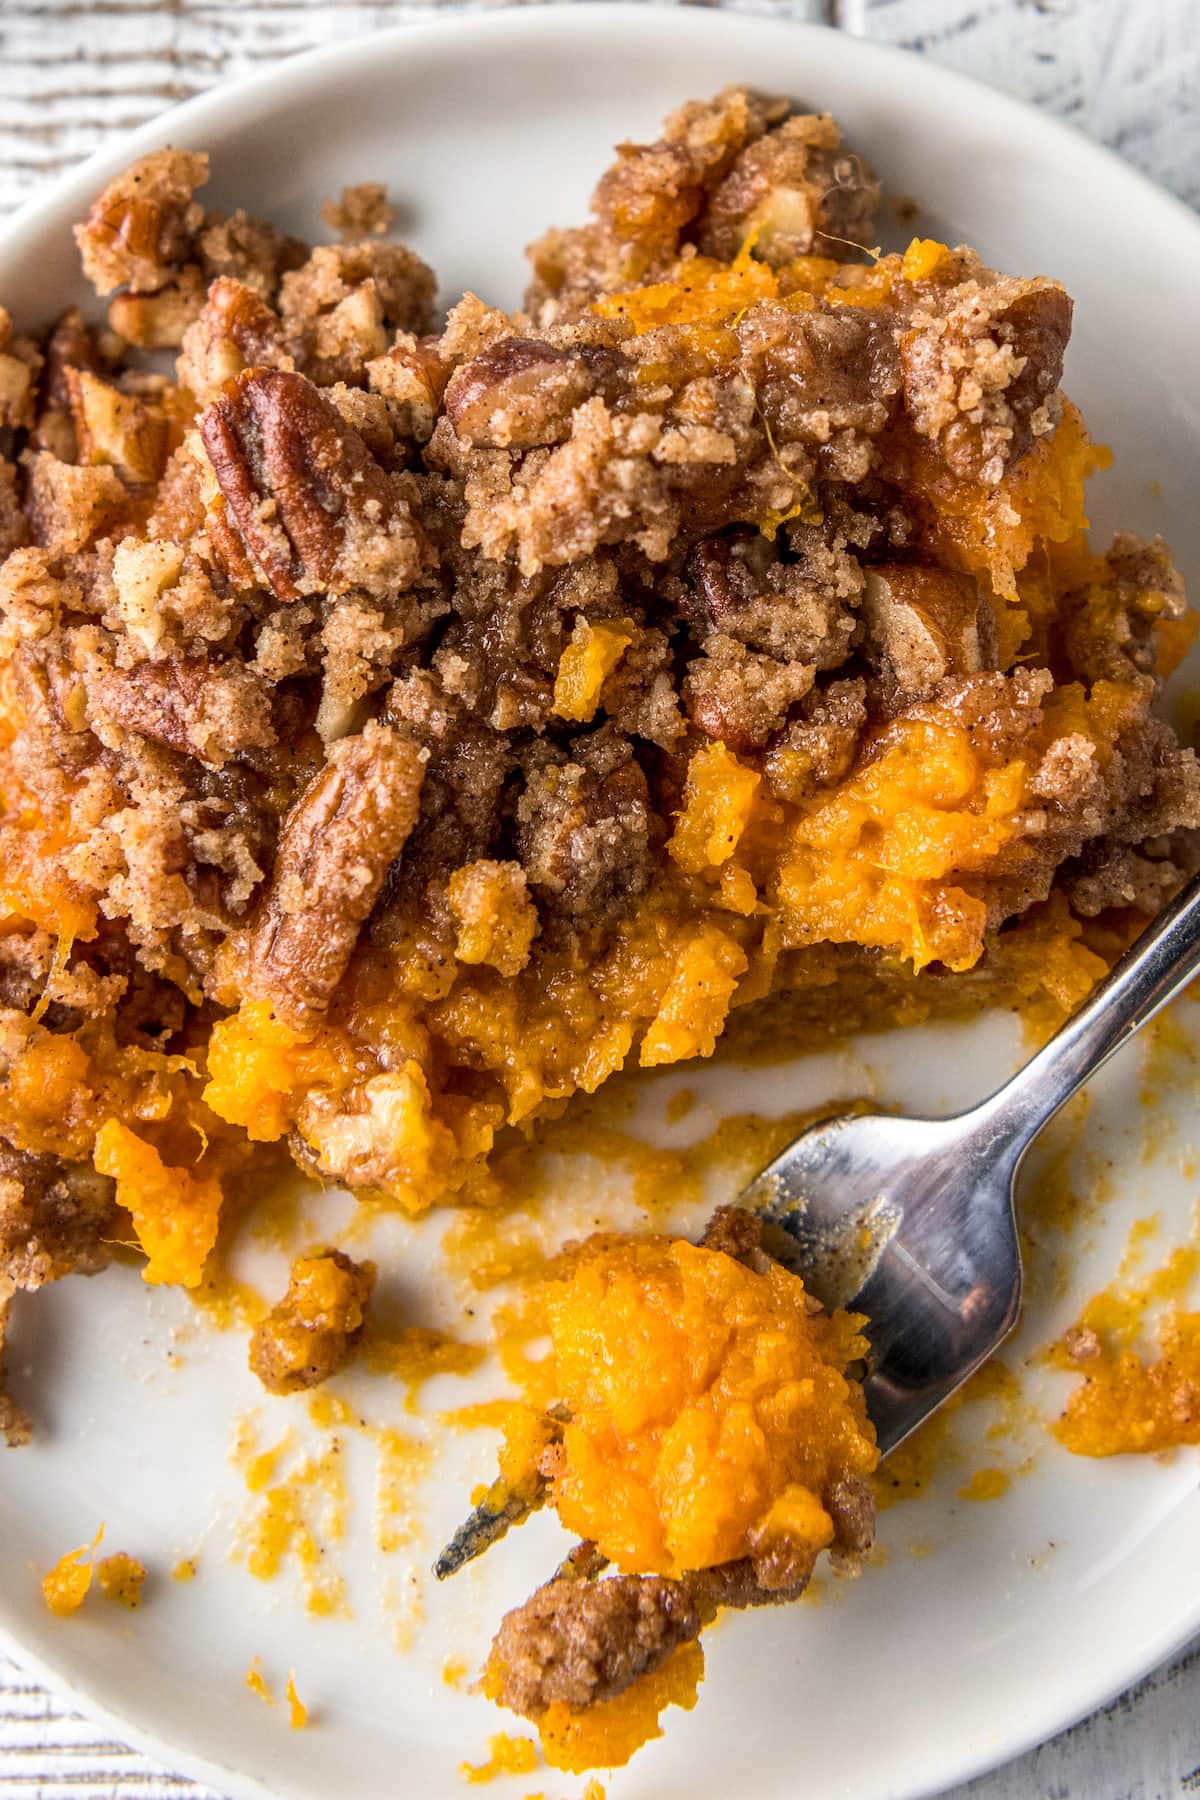 sweet potato soufflé with brown sugar and pecan topping